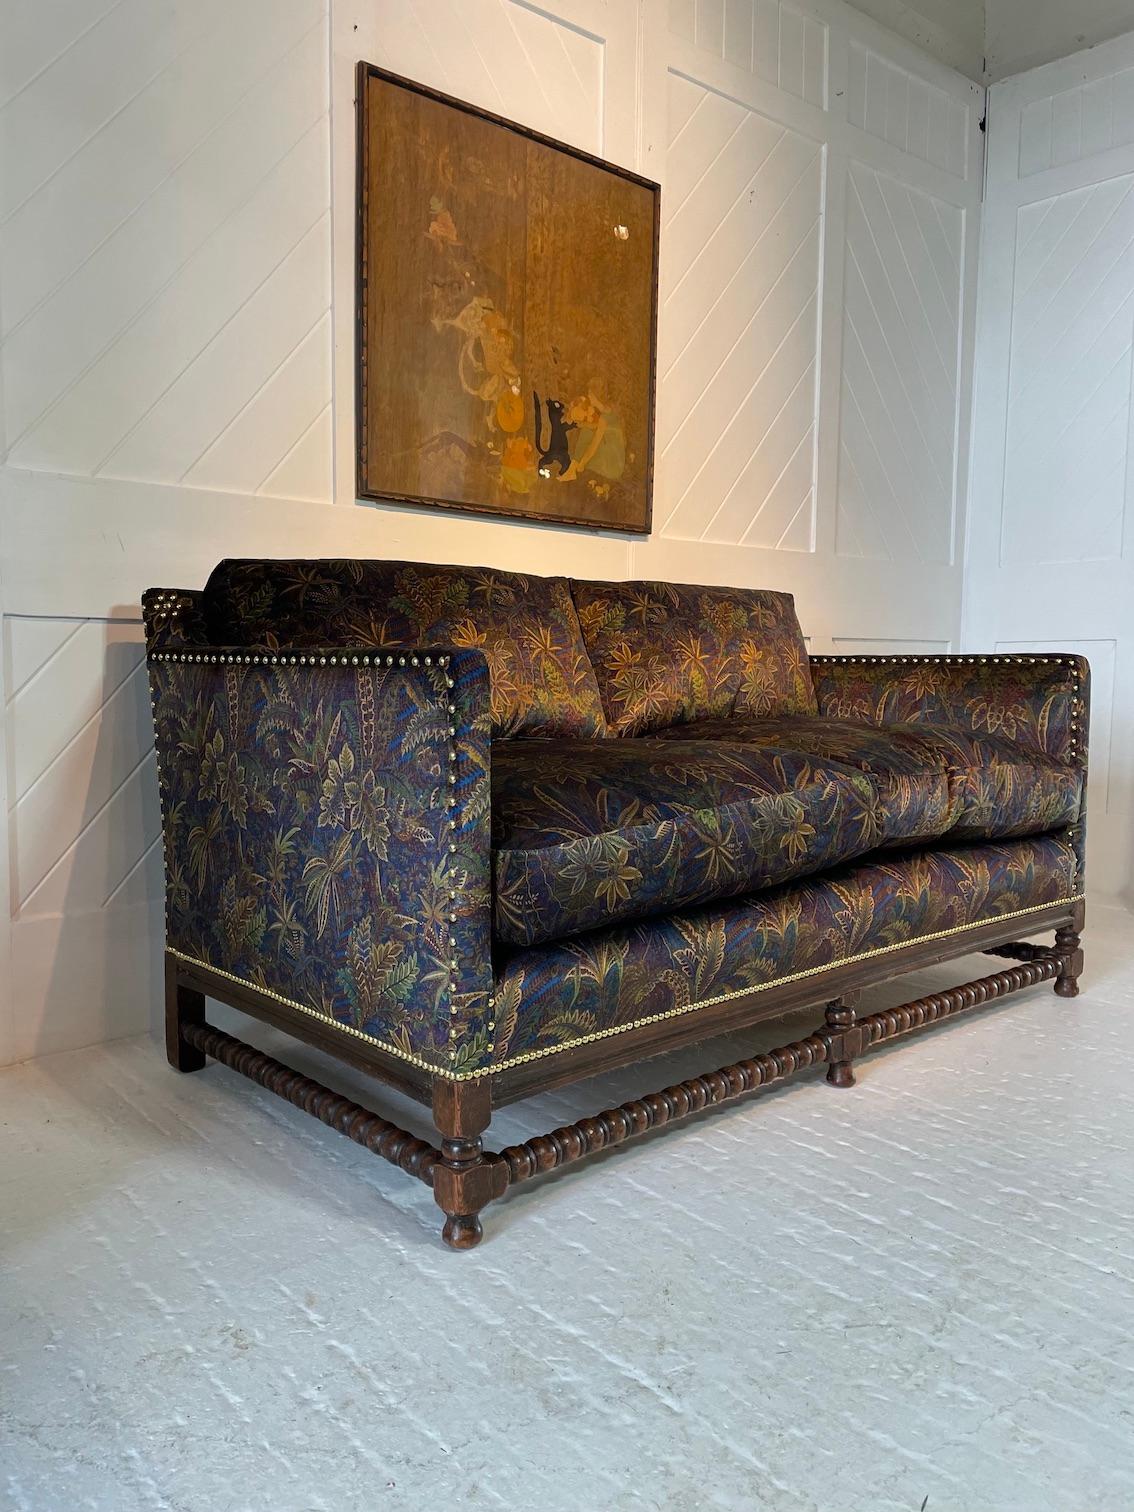 Exceptional quality oak framed, bobbin turned settee with decorative brass stud work.
This settee has been re-upholstered with Liberty velvet fabric ‘Shand Voyage, Winter’
This was possibly retailed by Liberty & Co
circa 1915.

   